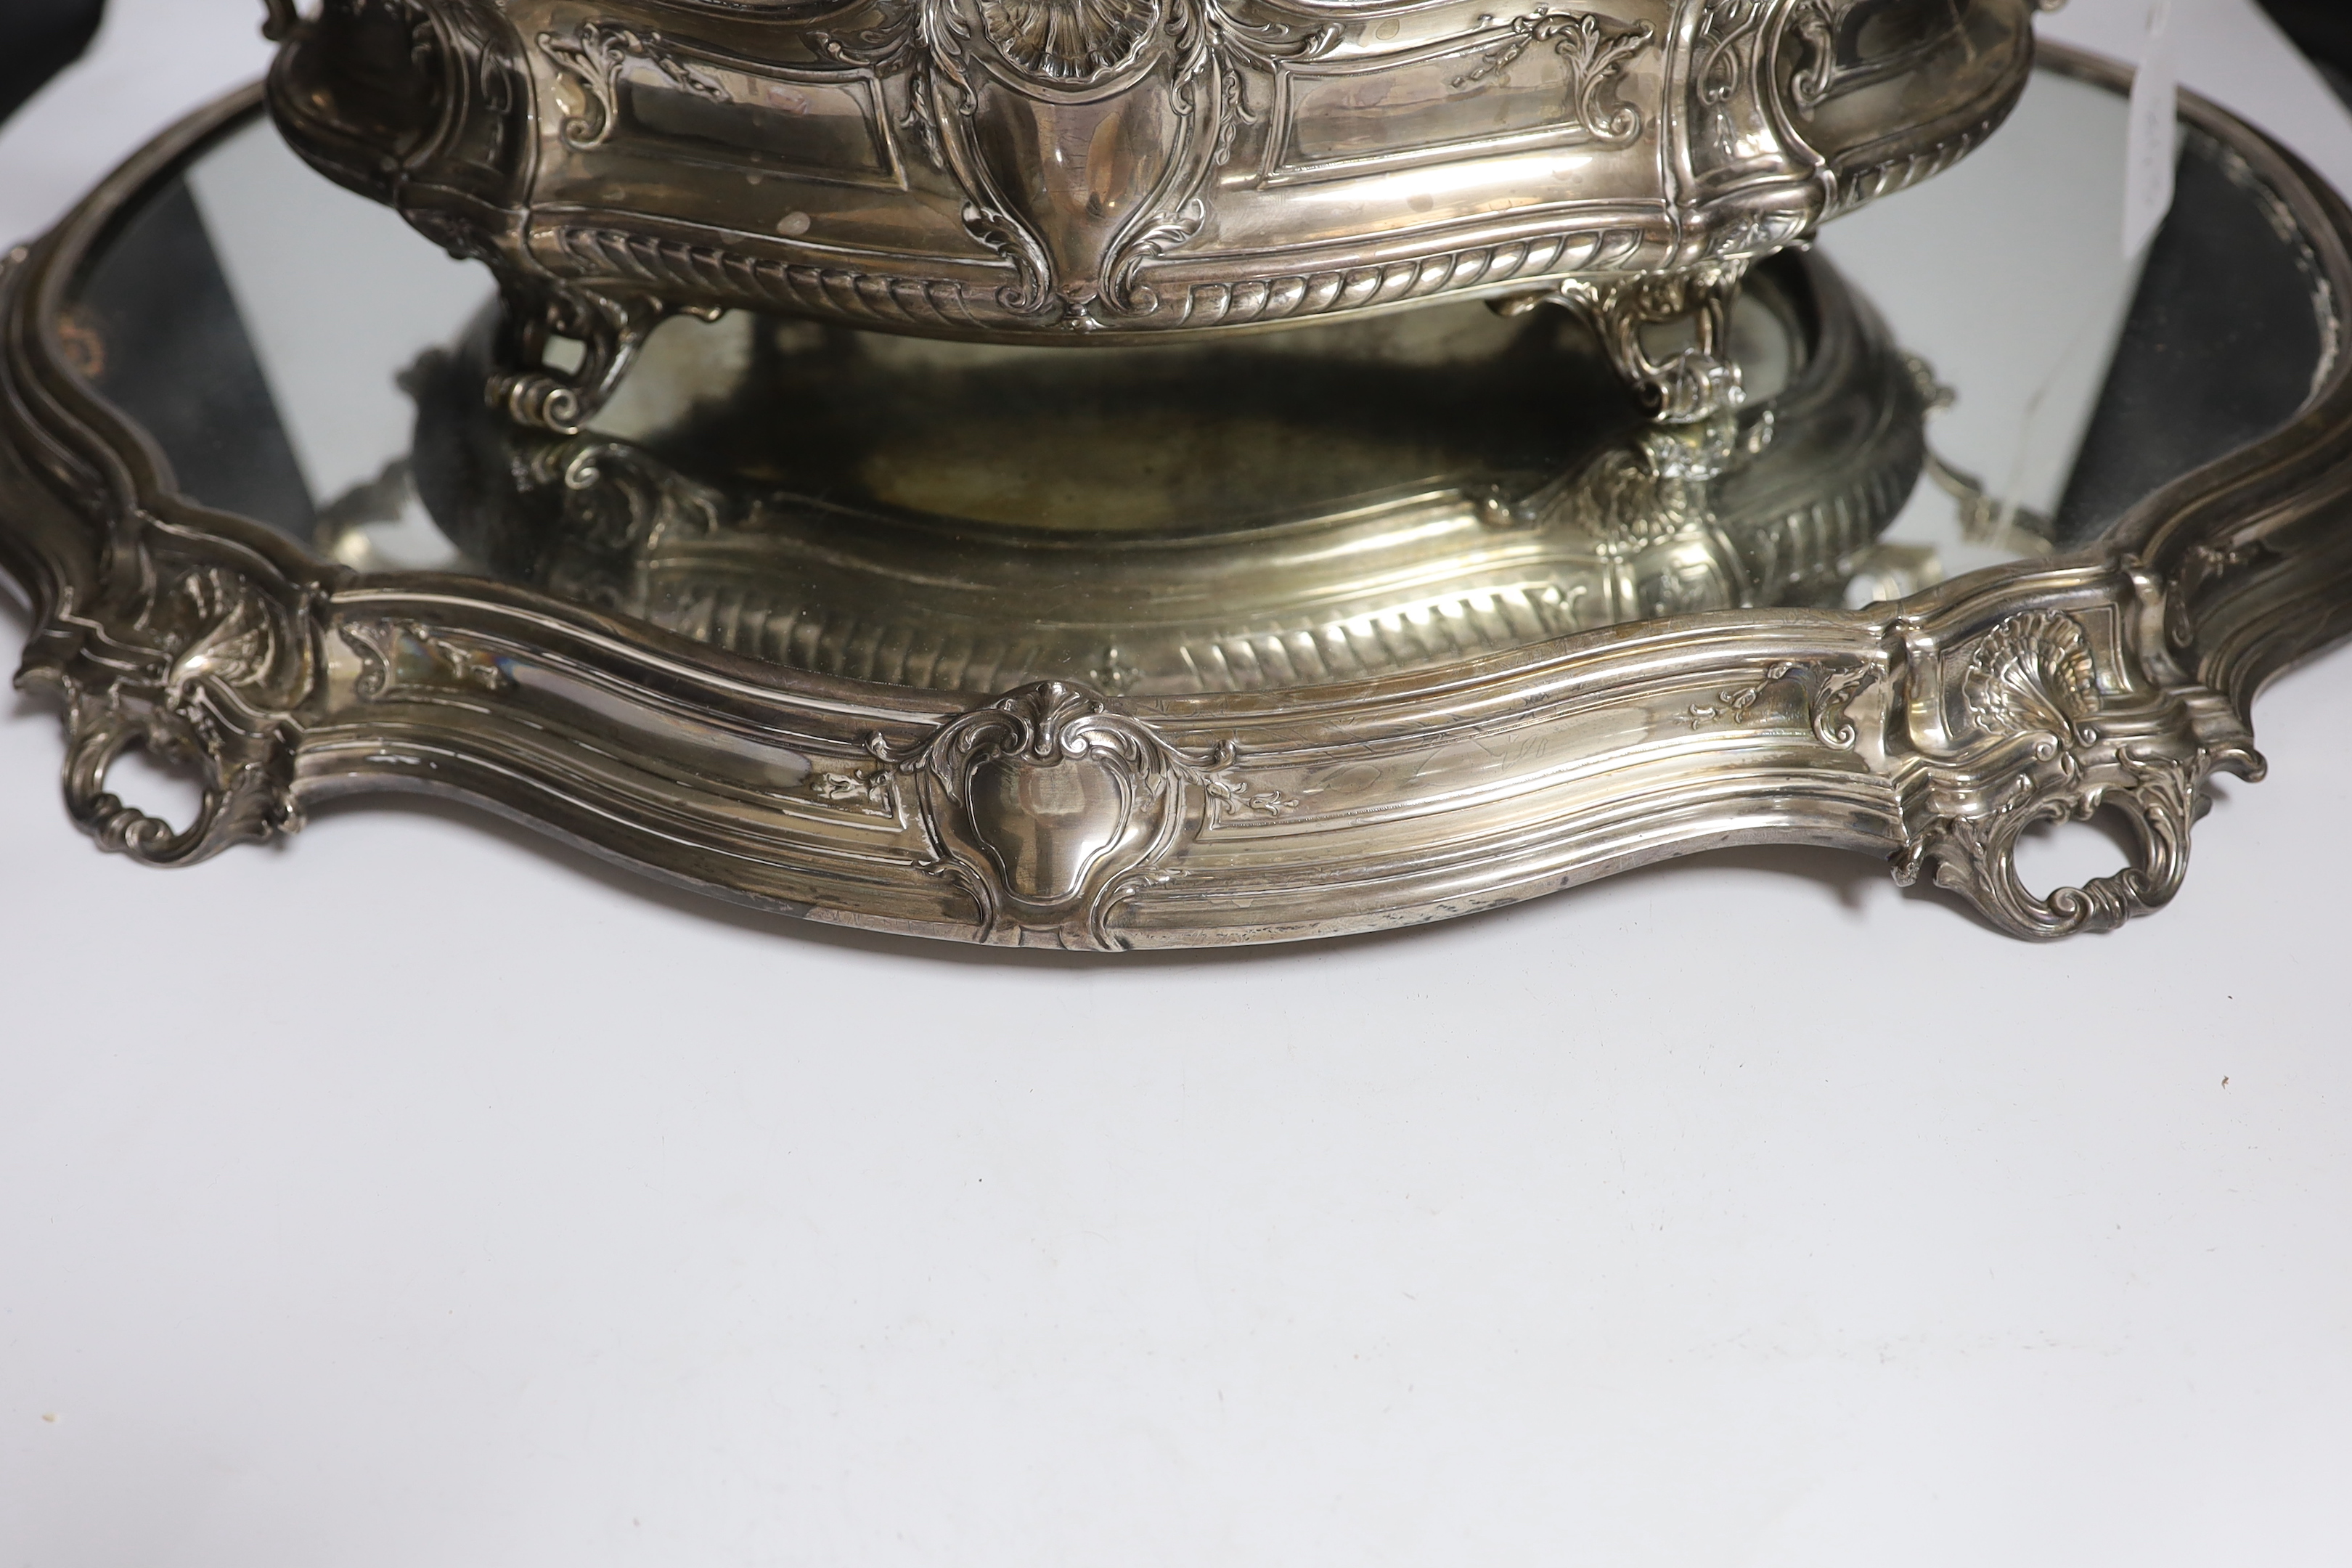 A large ornate Belgian? 800 standard white metal two handled oval centrepiece, 53cm, 46.1oz, with a base metal liner, on a similar 800 standard white metal mounted mirrored stand, 70cm.